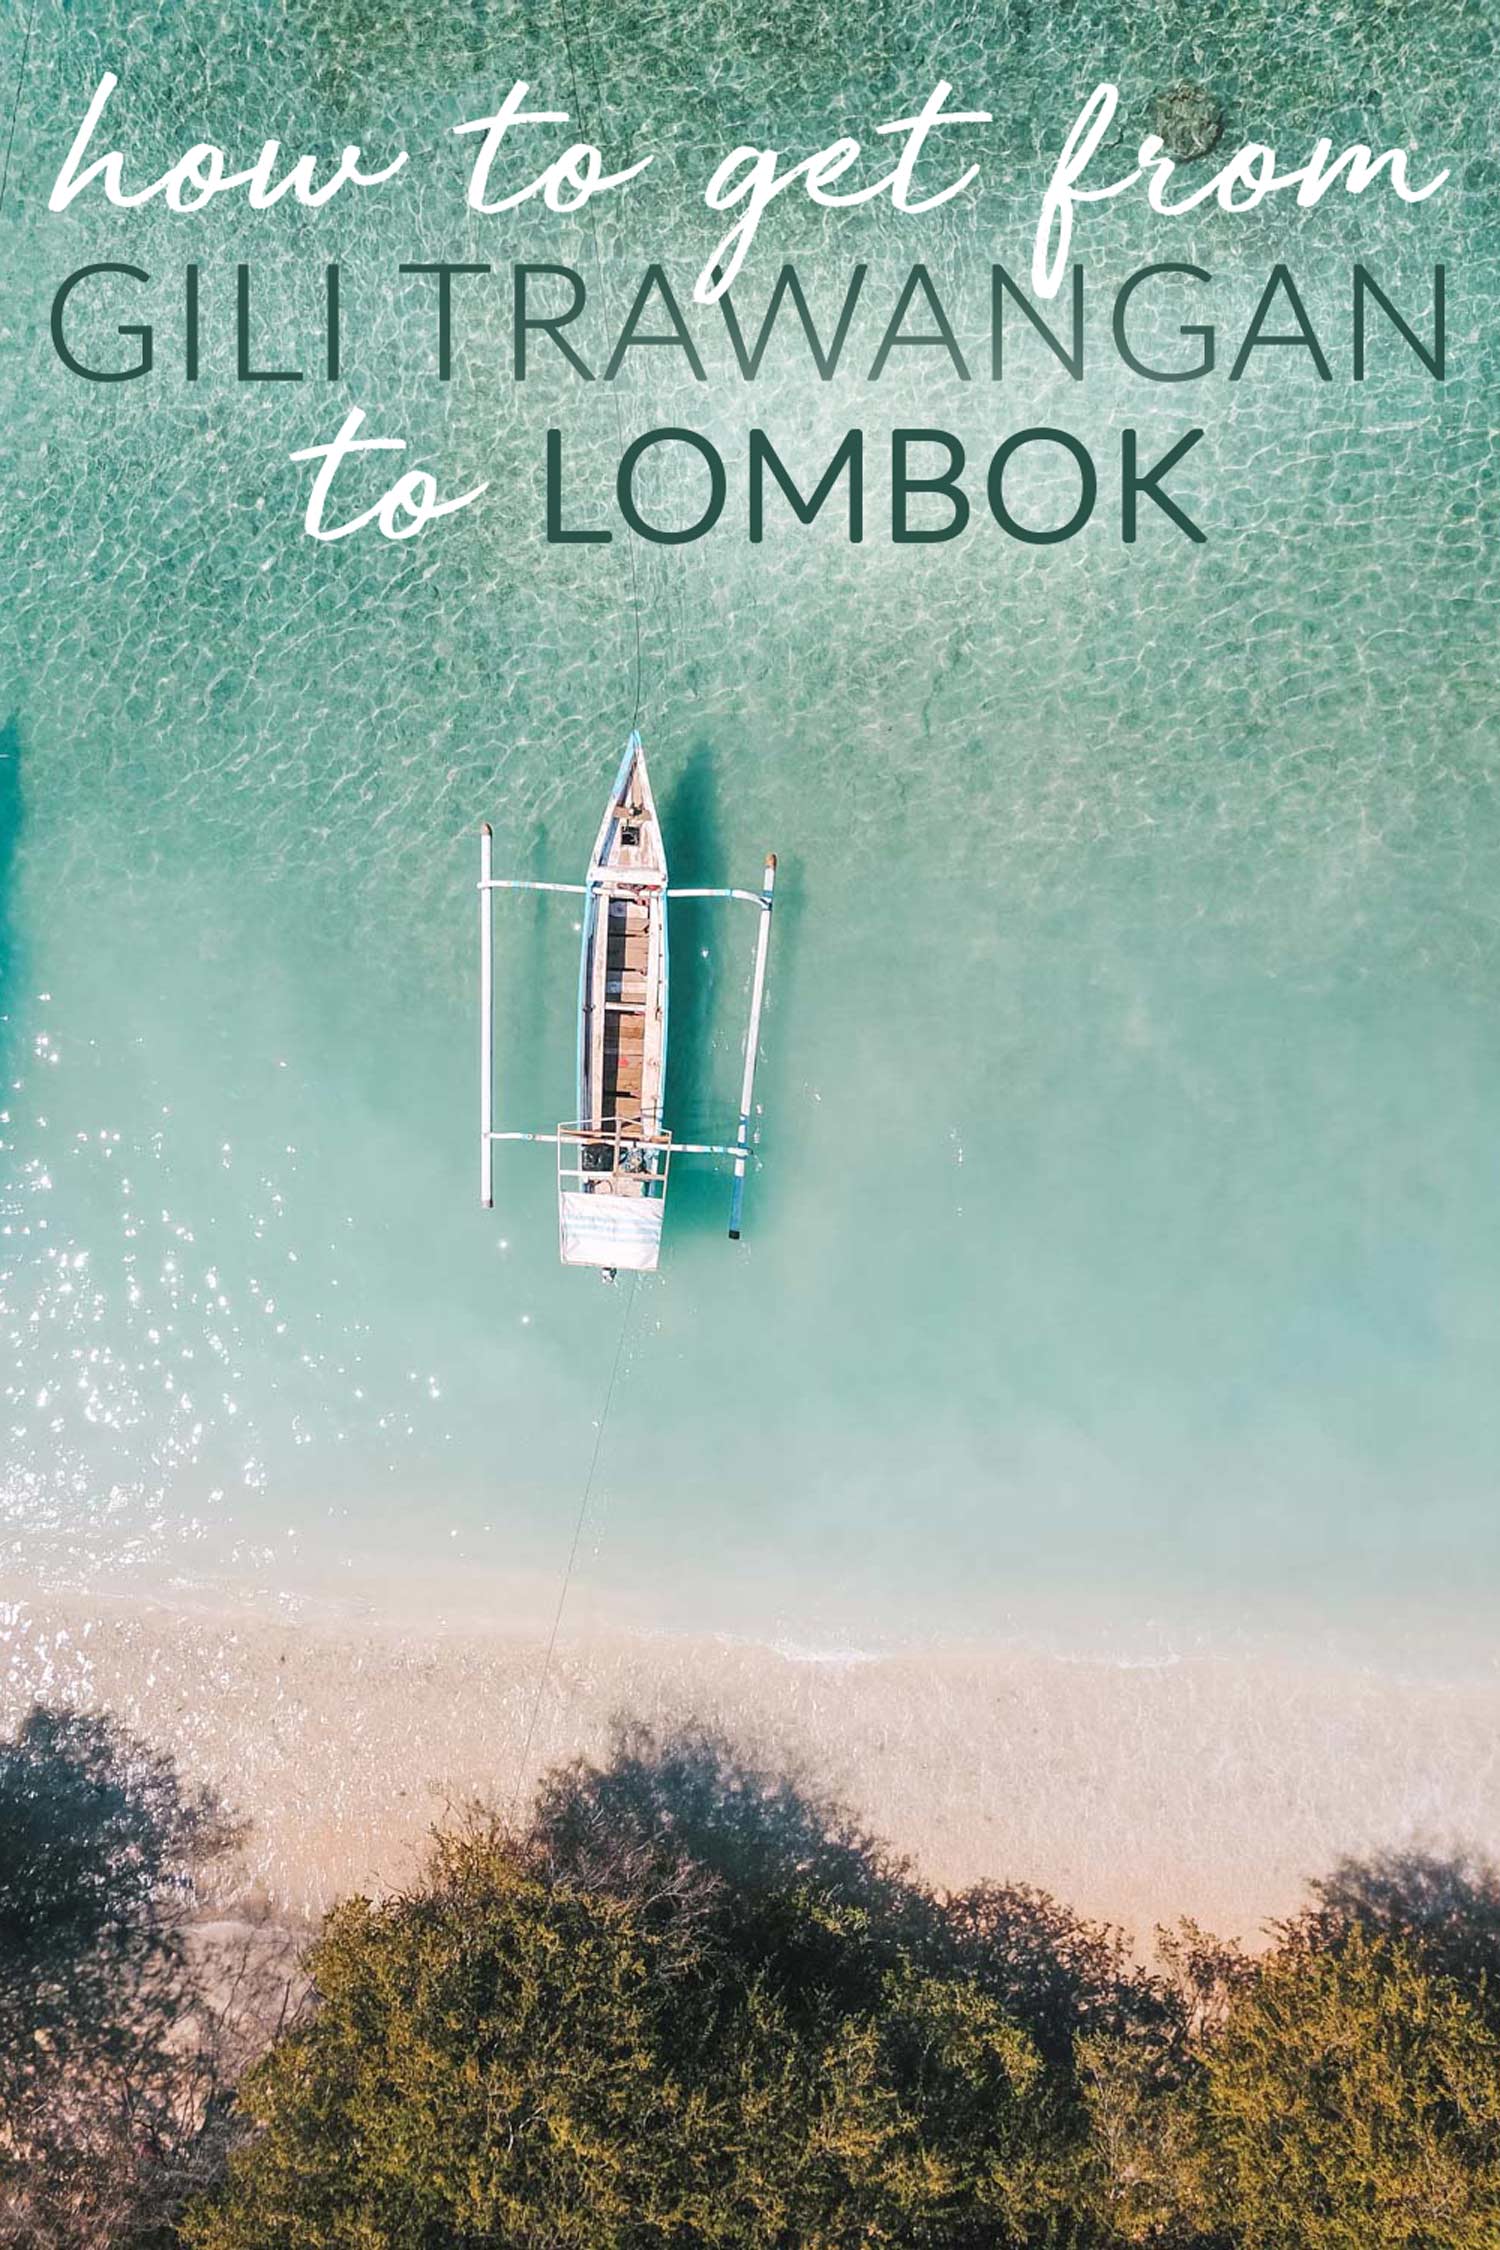 How to Get From Gili Trawangan to Lombok